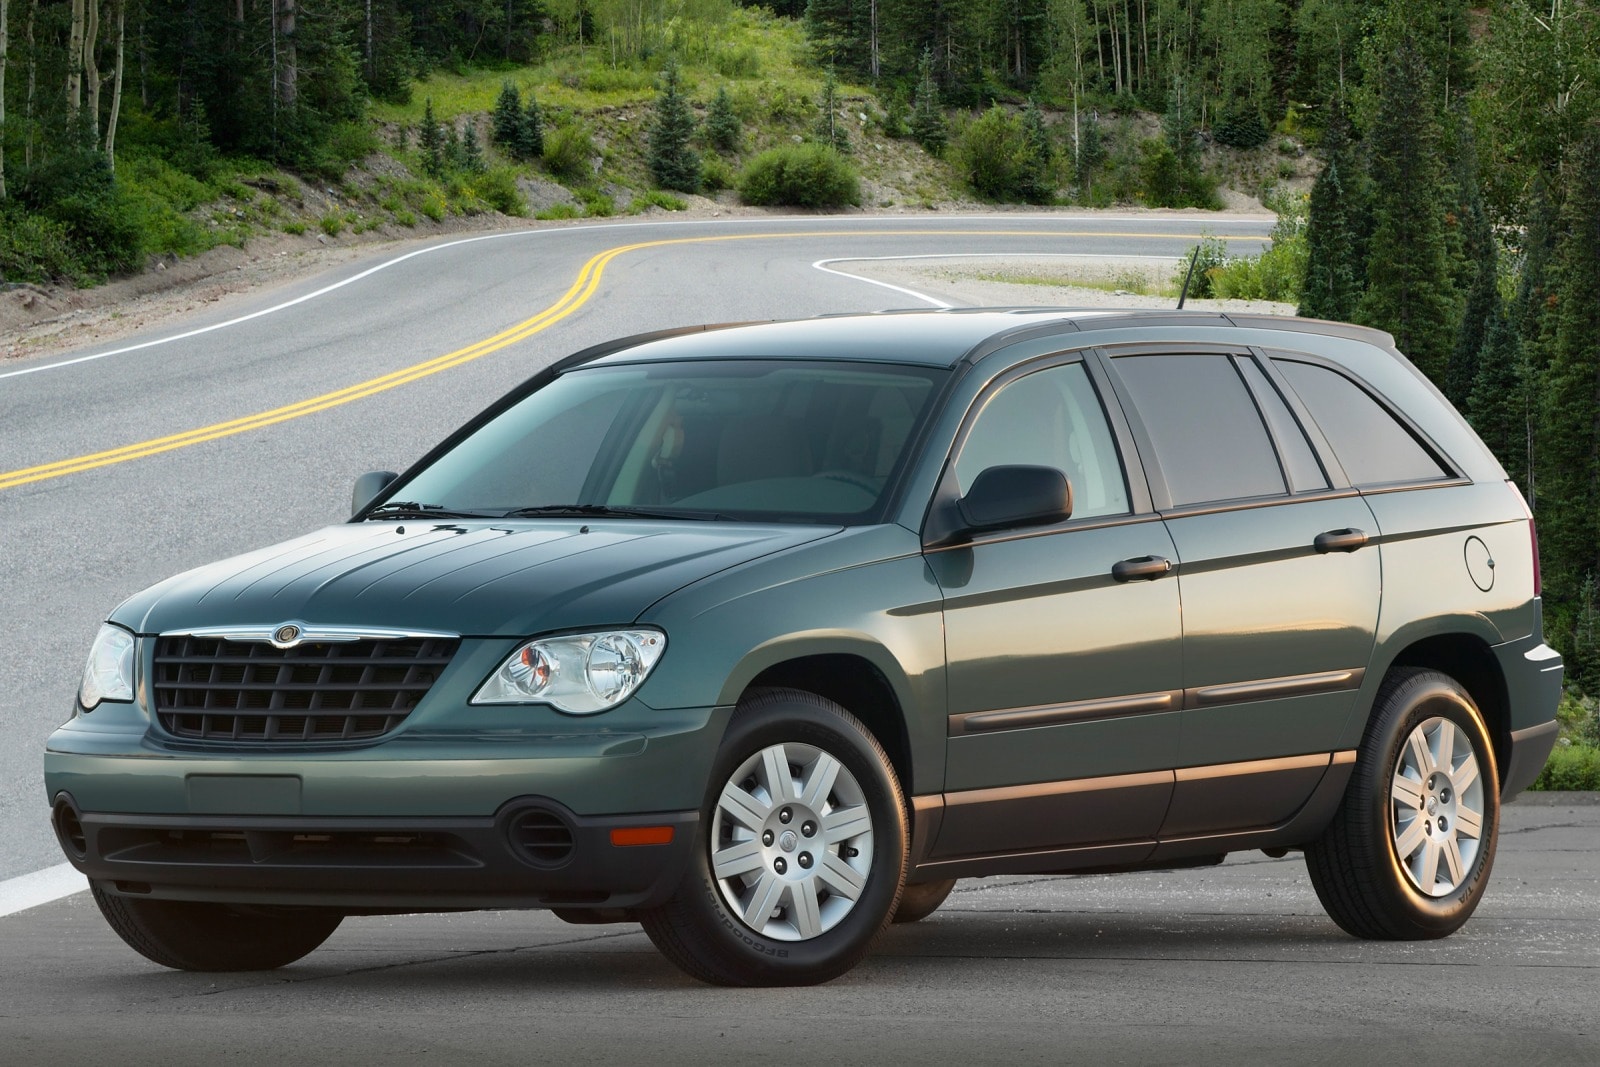 2007 Chrysler Pacifica Review & Ratings | Edmunds